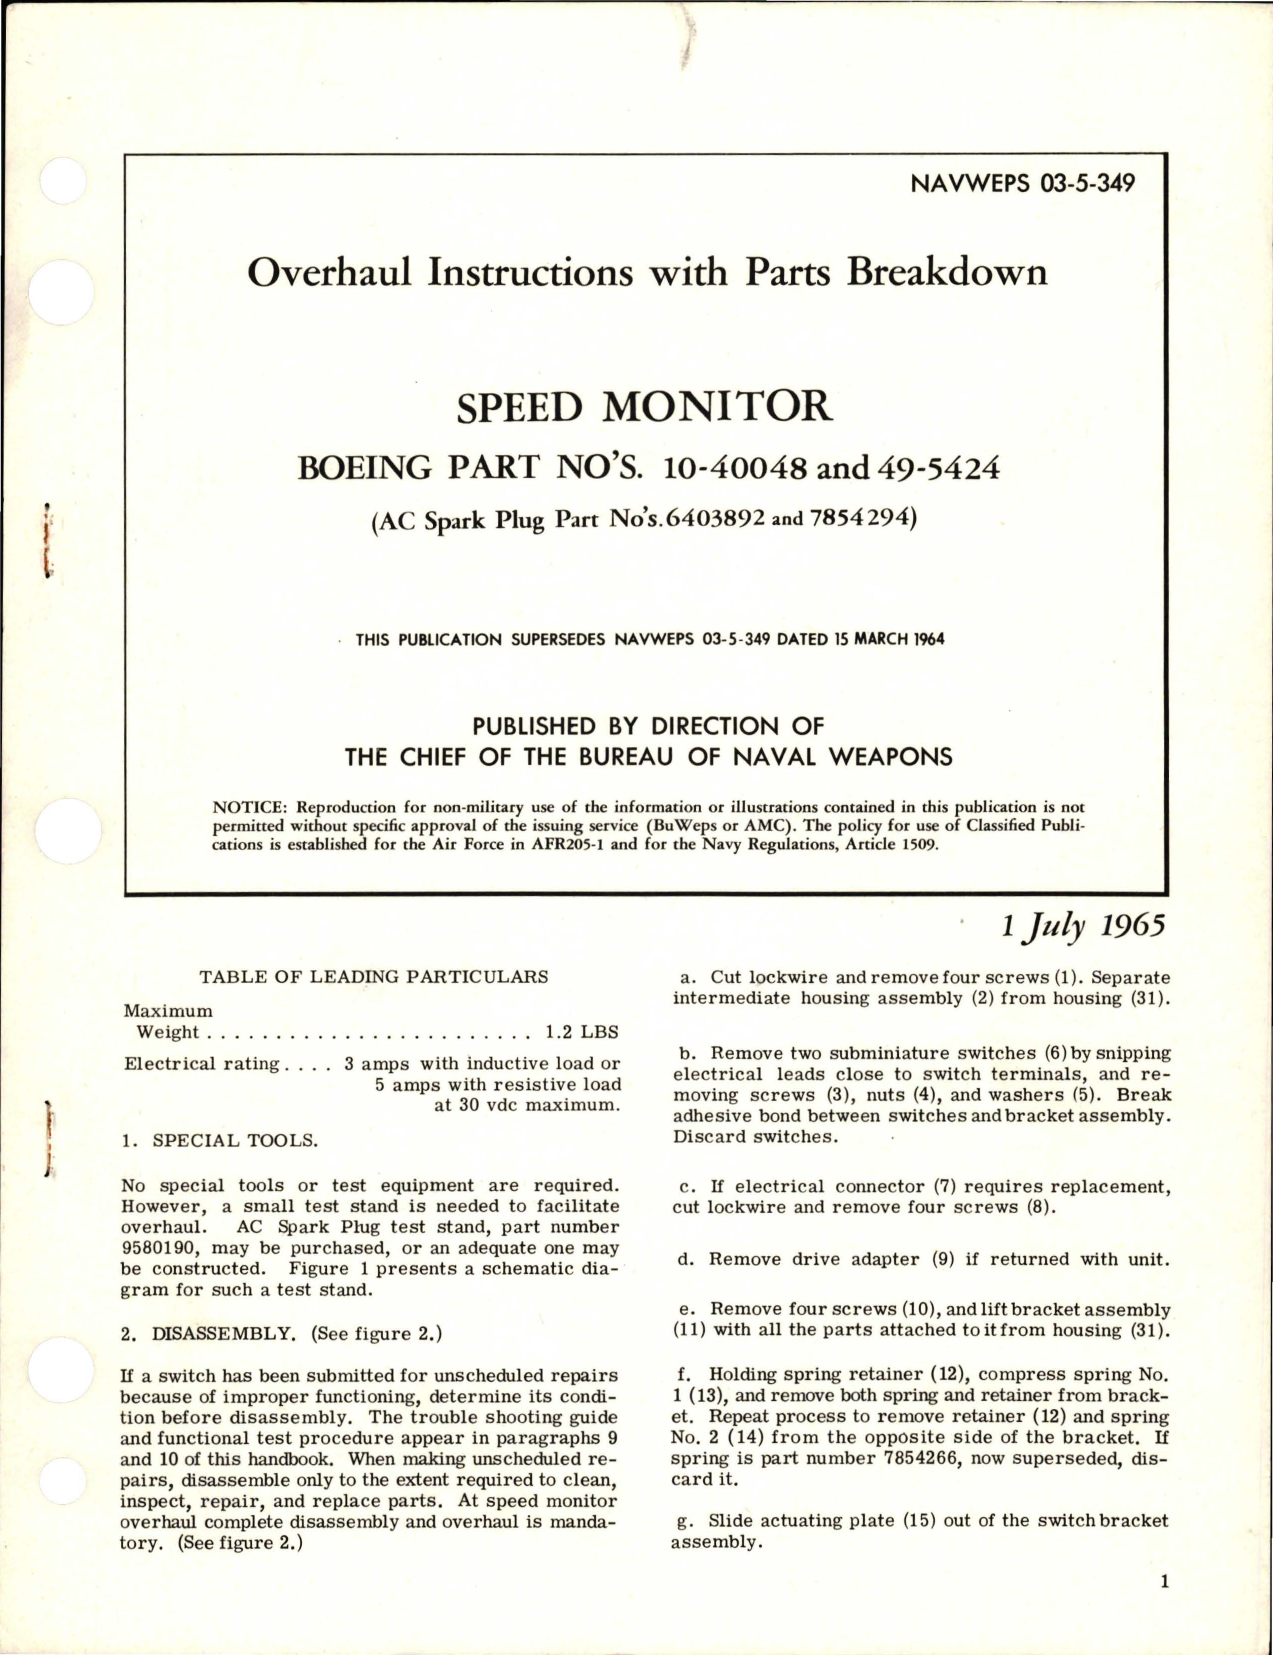 Sample page 1 from AirCorps Library document: Overhaul Instructions with Parts Breakdown for Speed Monitor 